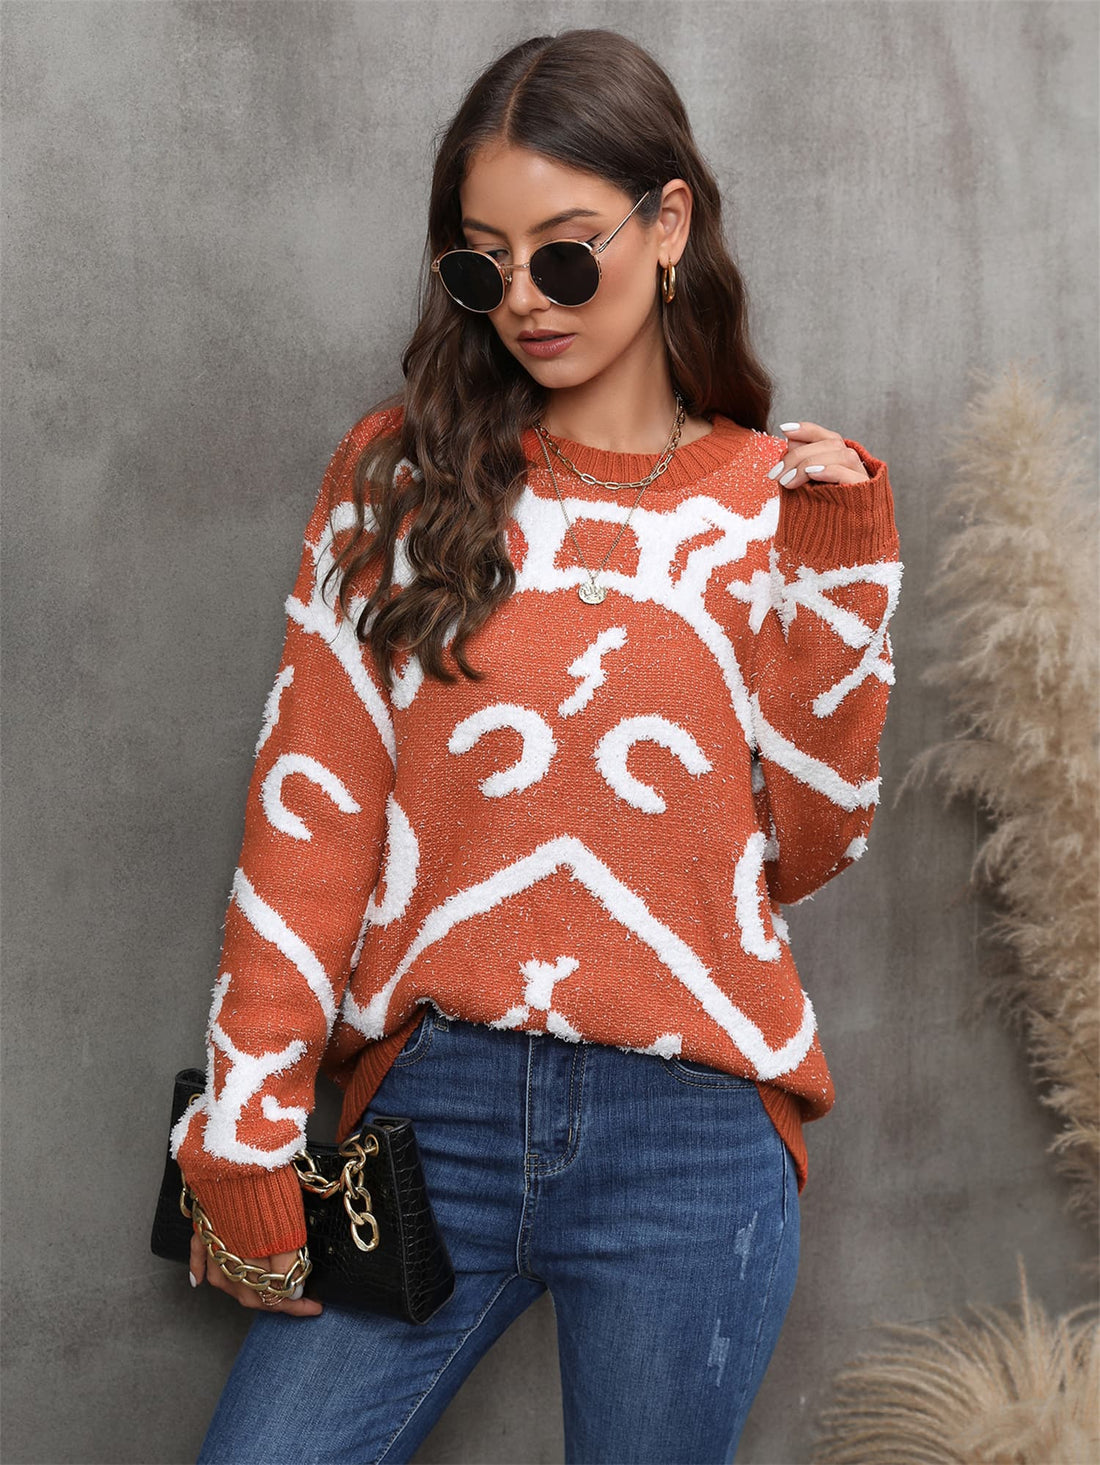 "An image of a cozy and stylish printed round neck dropped shoulder sweater. The sweater features a relaxed fit with dropped shoulder seams, creating a casual and comfortable look. The round neckline adds a touch of elegance, while the intricate print on the sweater adds a unique and fashionable element. The fabric appears soft and textured, perfect for keeping warm during colder seasons. Overall, a chic and comfortable sweater choice for a trendy and relaxed outfit."